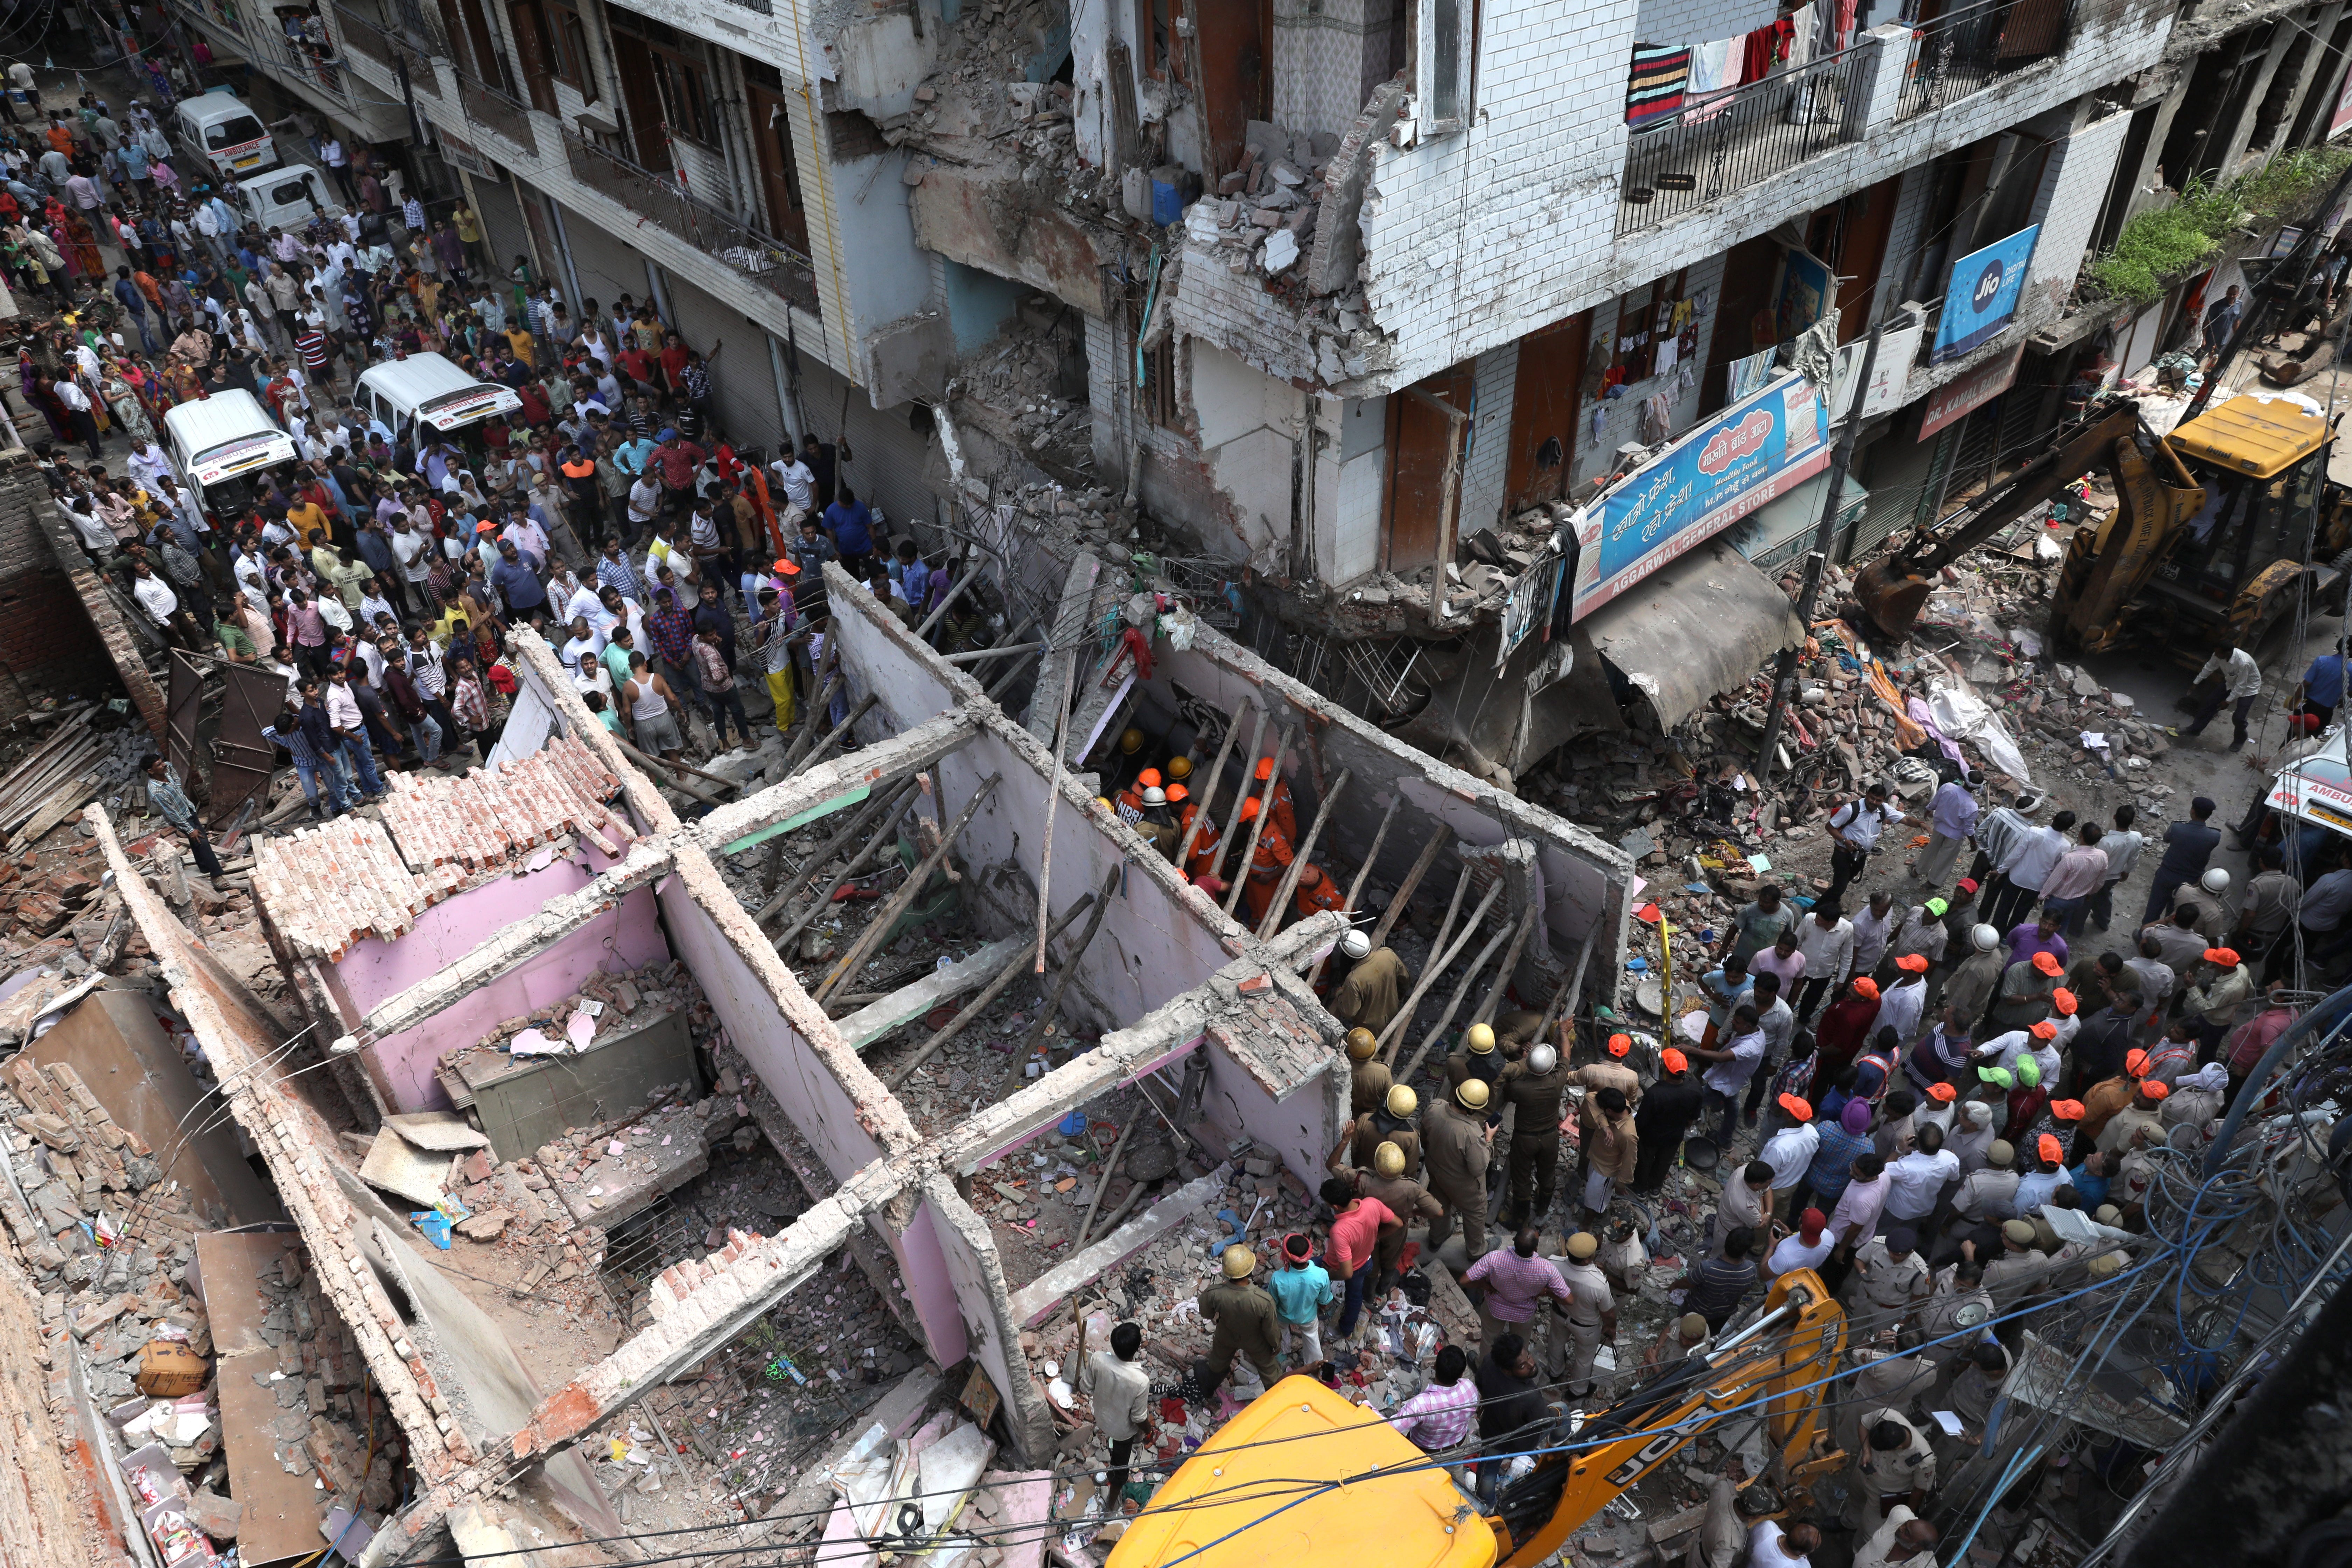 Indian National Disaster Response Force (NDRF) rescue workers operate on the site of a building collapse in New Delhi, India on Sept. 26, 2018. According to media reports, at least five people were killed and many injured in a building collapse in Ne